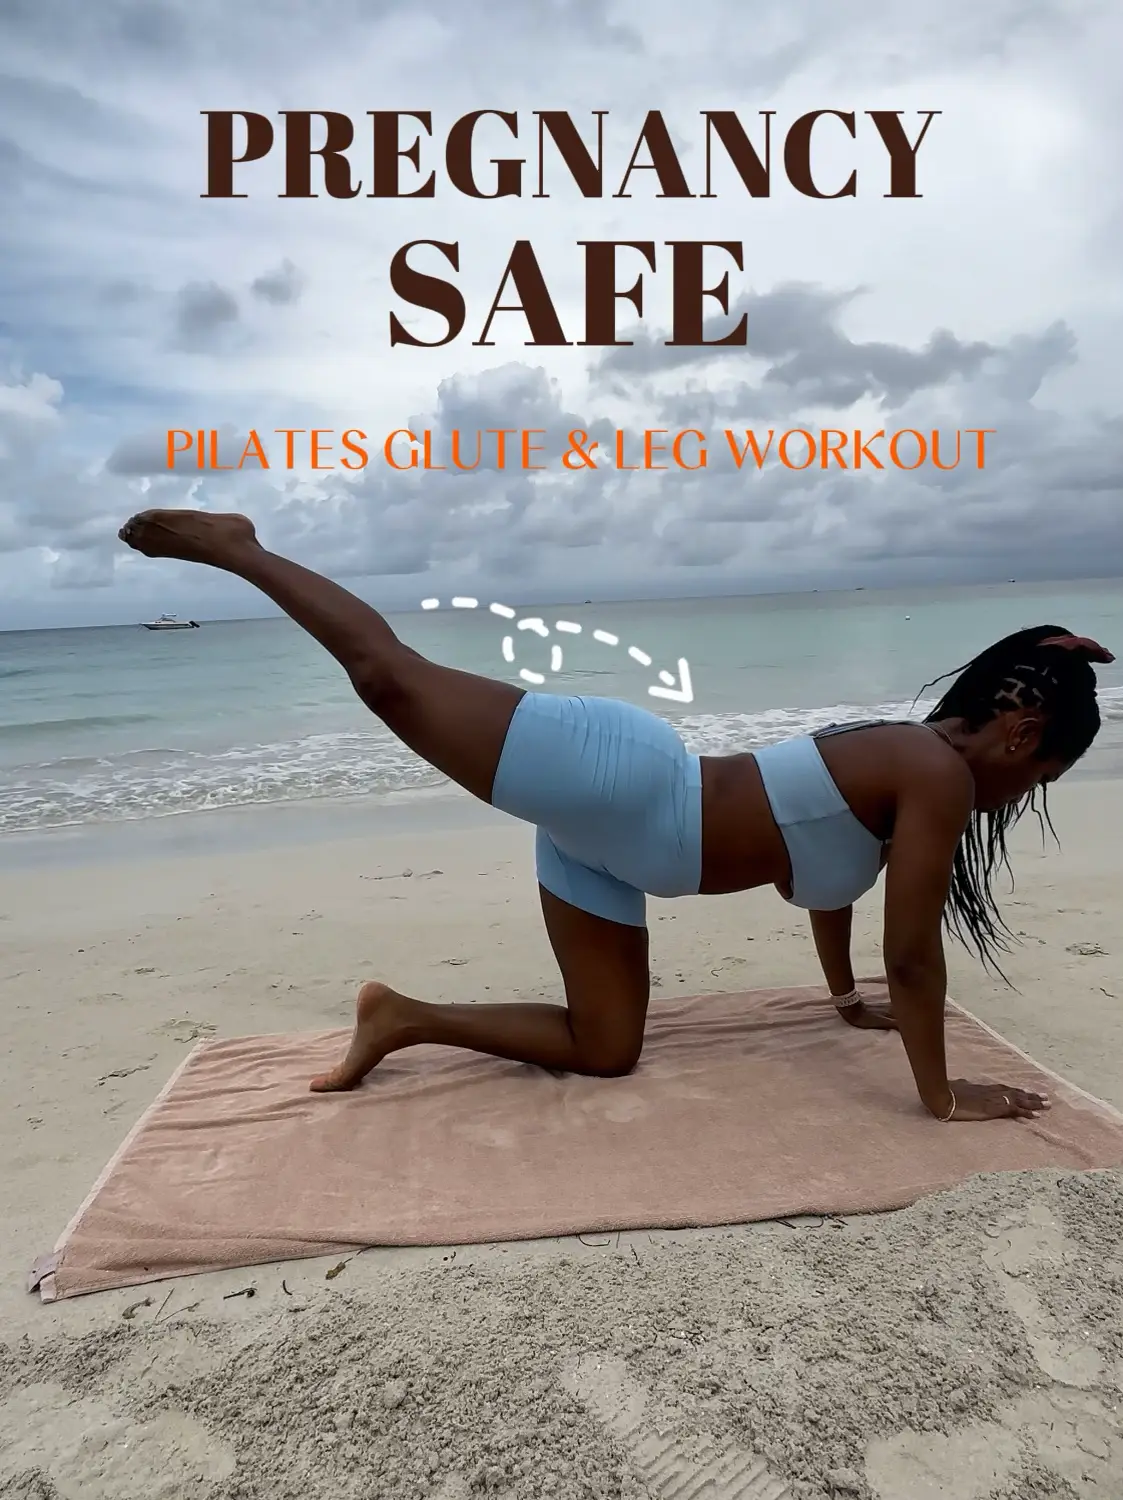 Prenatal Low-Impact Cardio HIIT Workout With Leg & Glute Focus